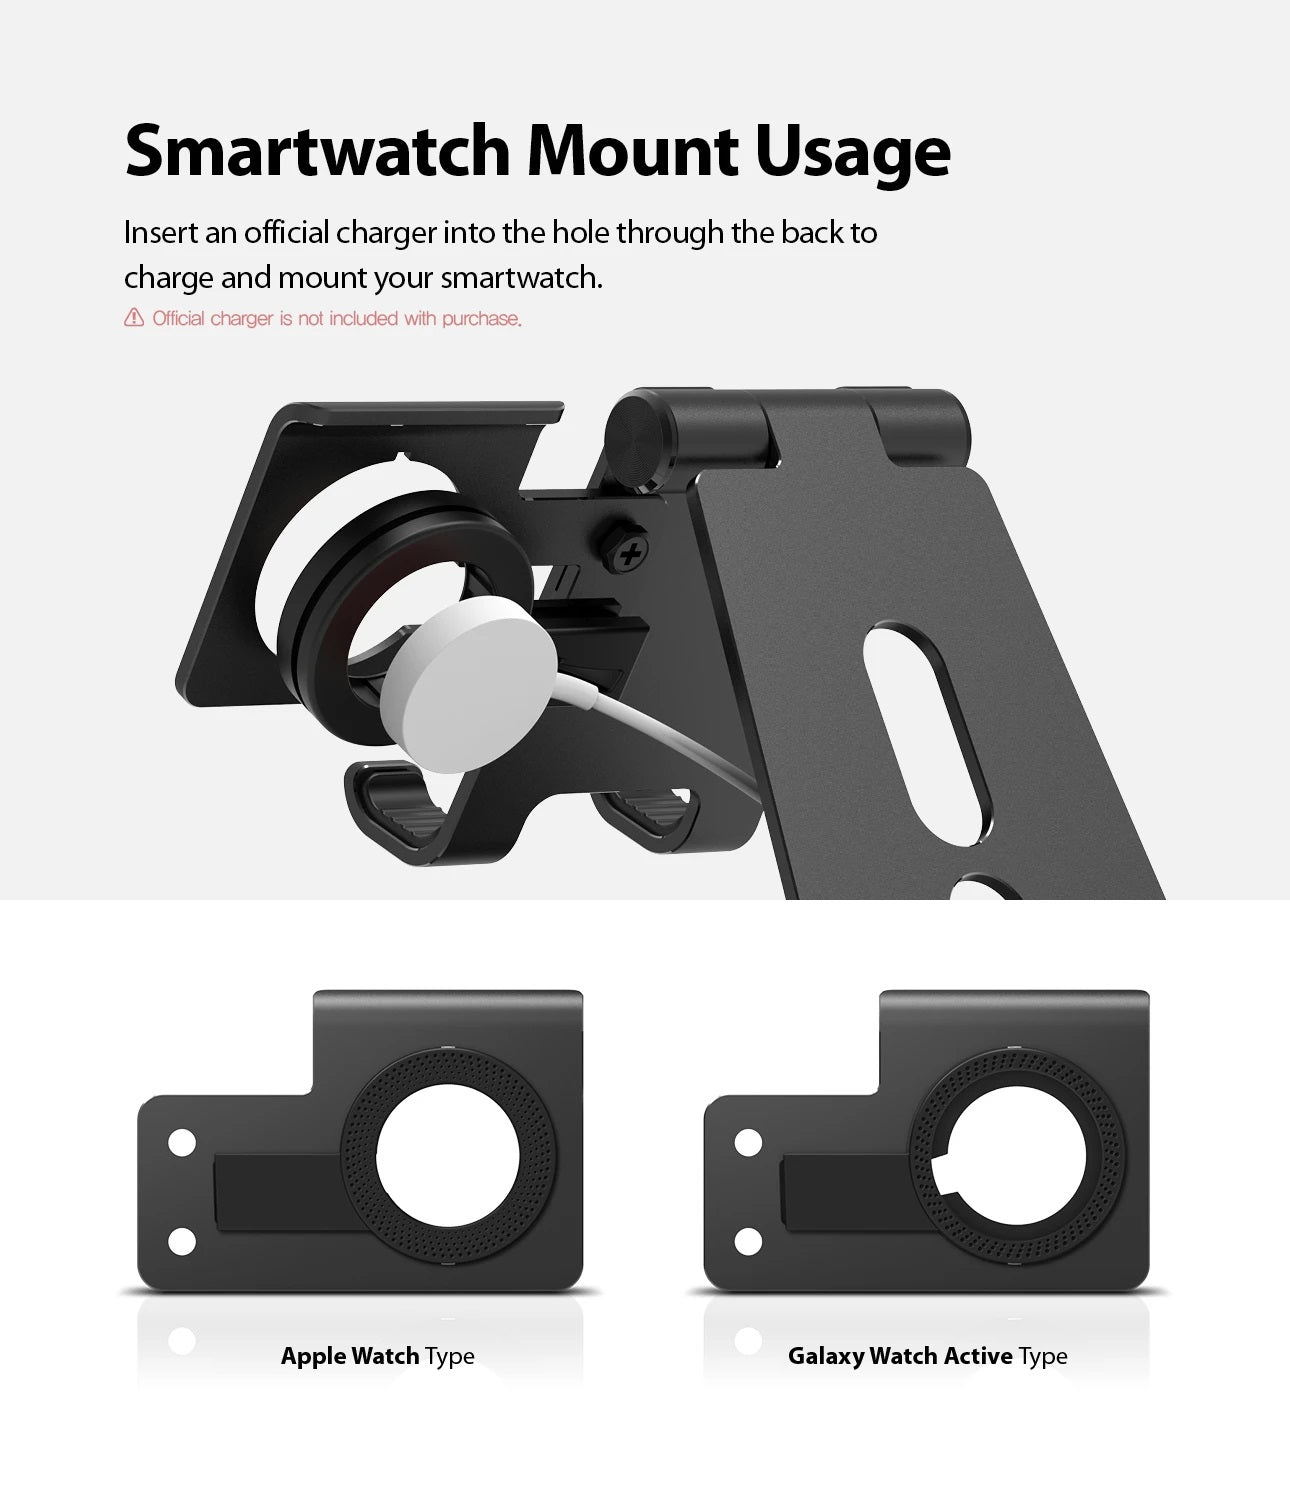 Shop and buy Ringke Super Folding Stand for Smart Phone & Apple Watch Mount 2-in-1 Design Multi-Angle| Casefactorie® online with great deals and sales prices with fast and safe shipping. Casefactorie is the largest Singapore official authorised retailer for the largest collection of mobile premium accessories.